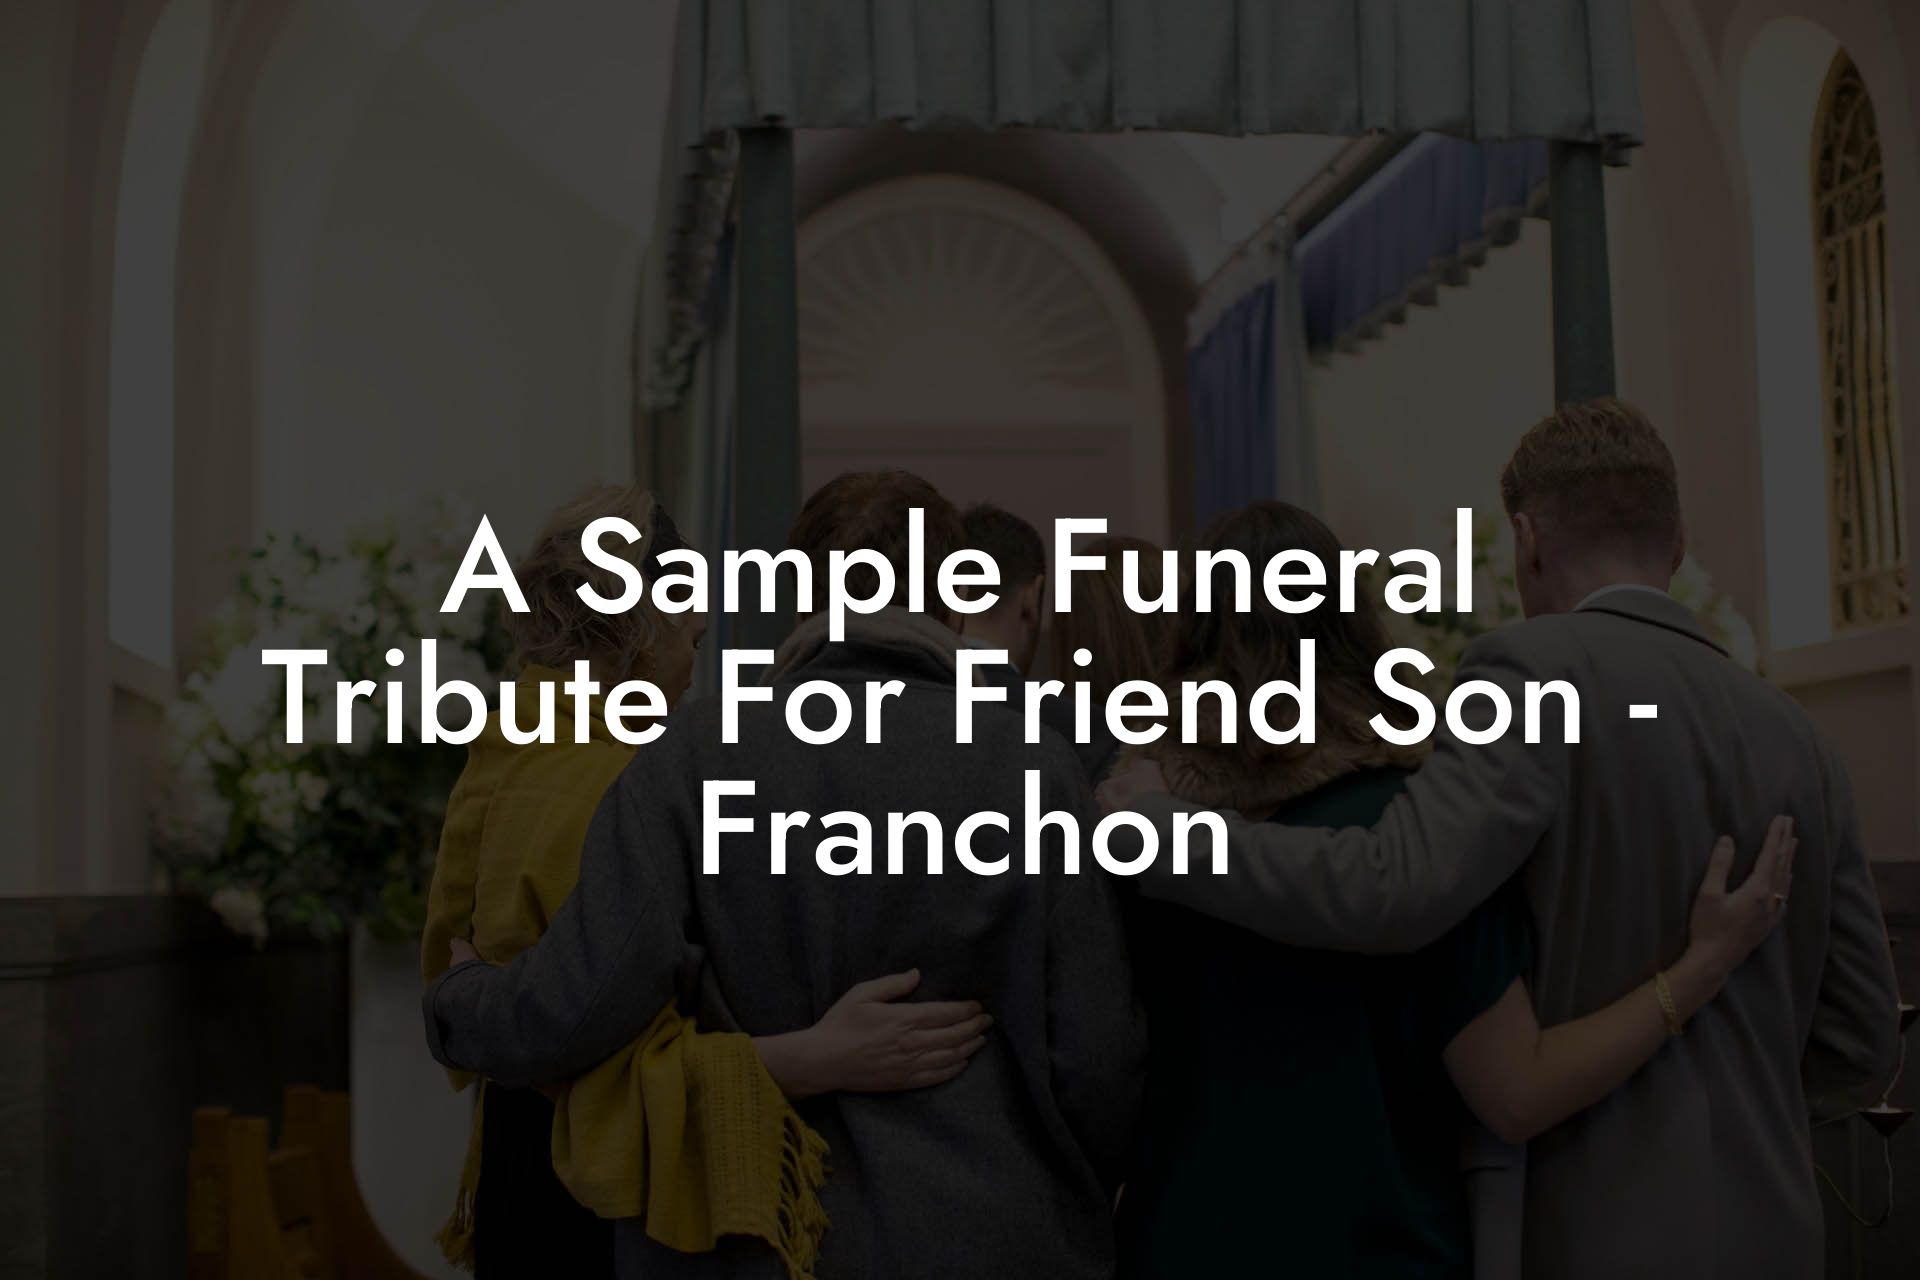 A Sample Funeral Tribute For Friend Son - Franchon